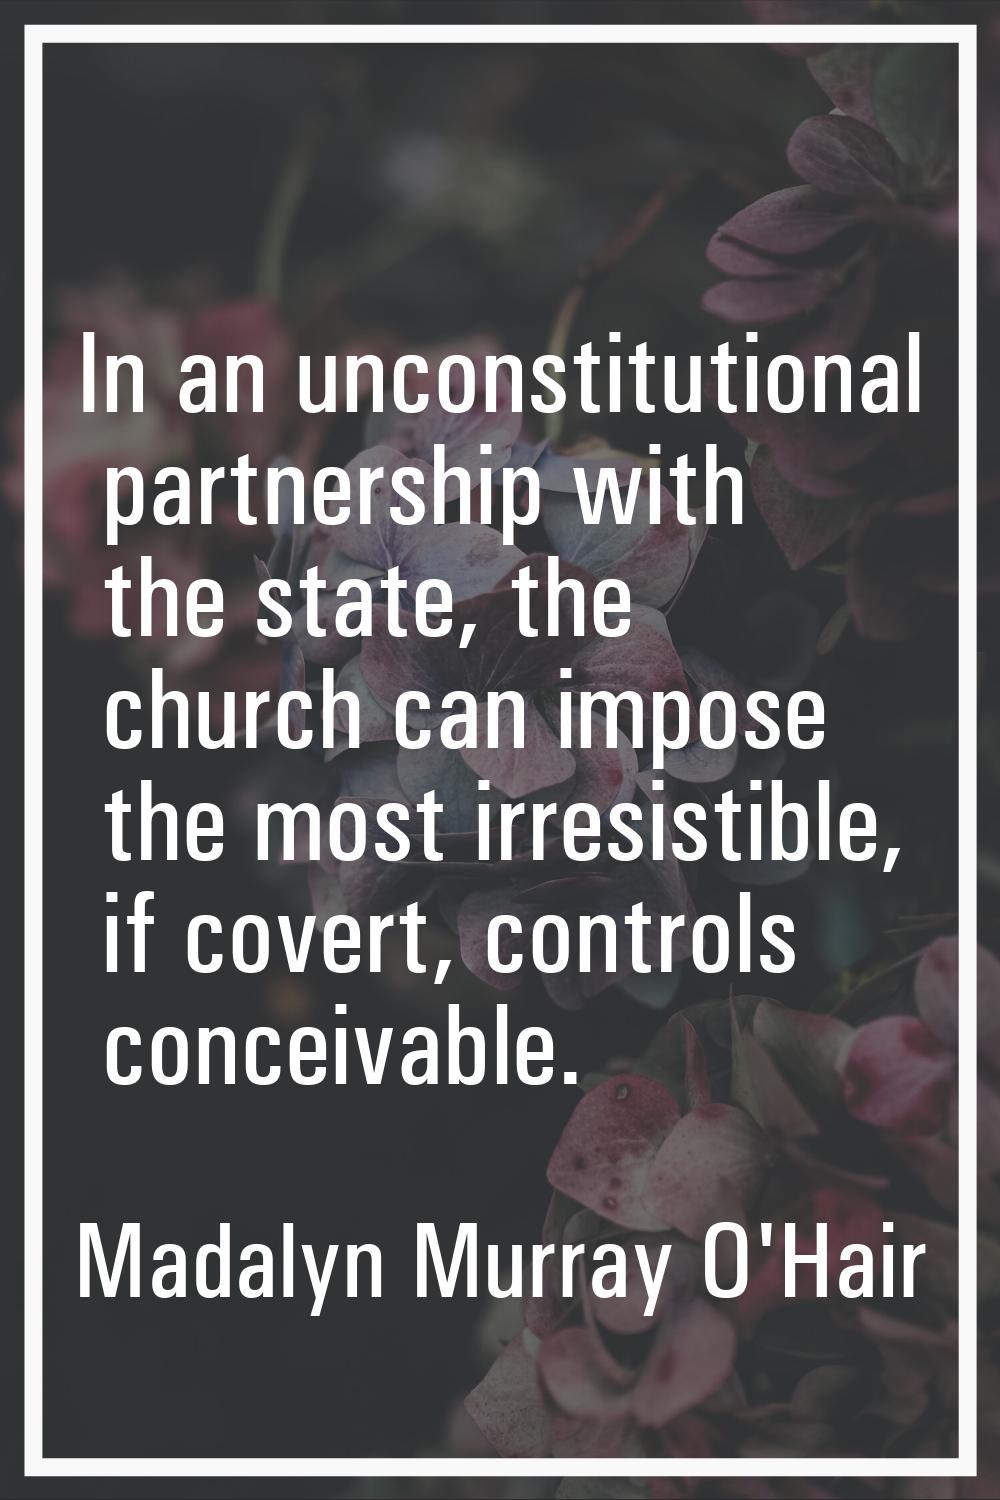 In an unconstitutional partnership with the state, the church can impose the most irresistible, if 